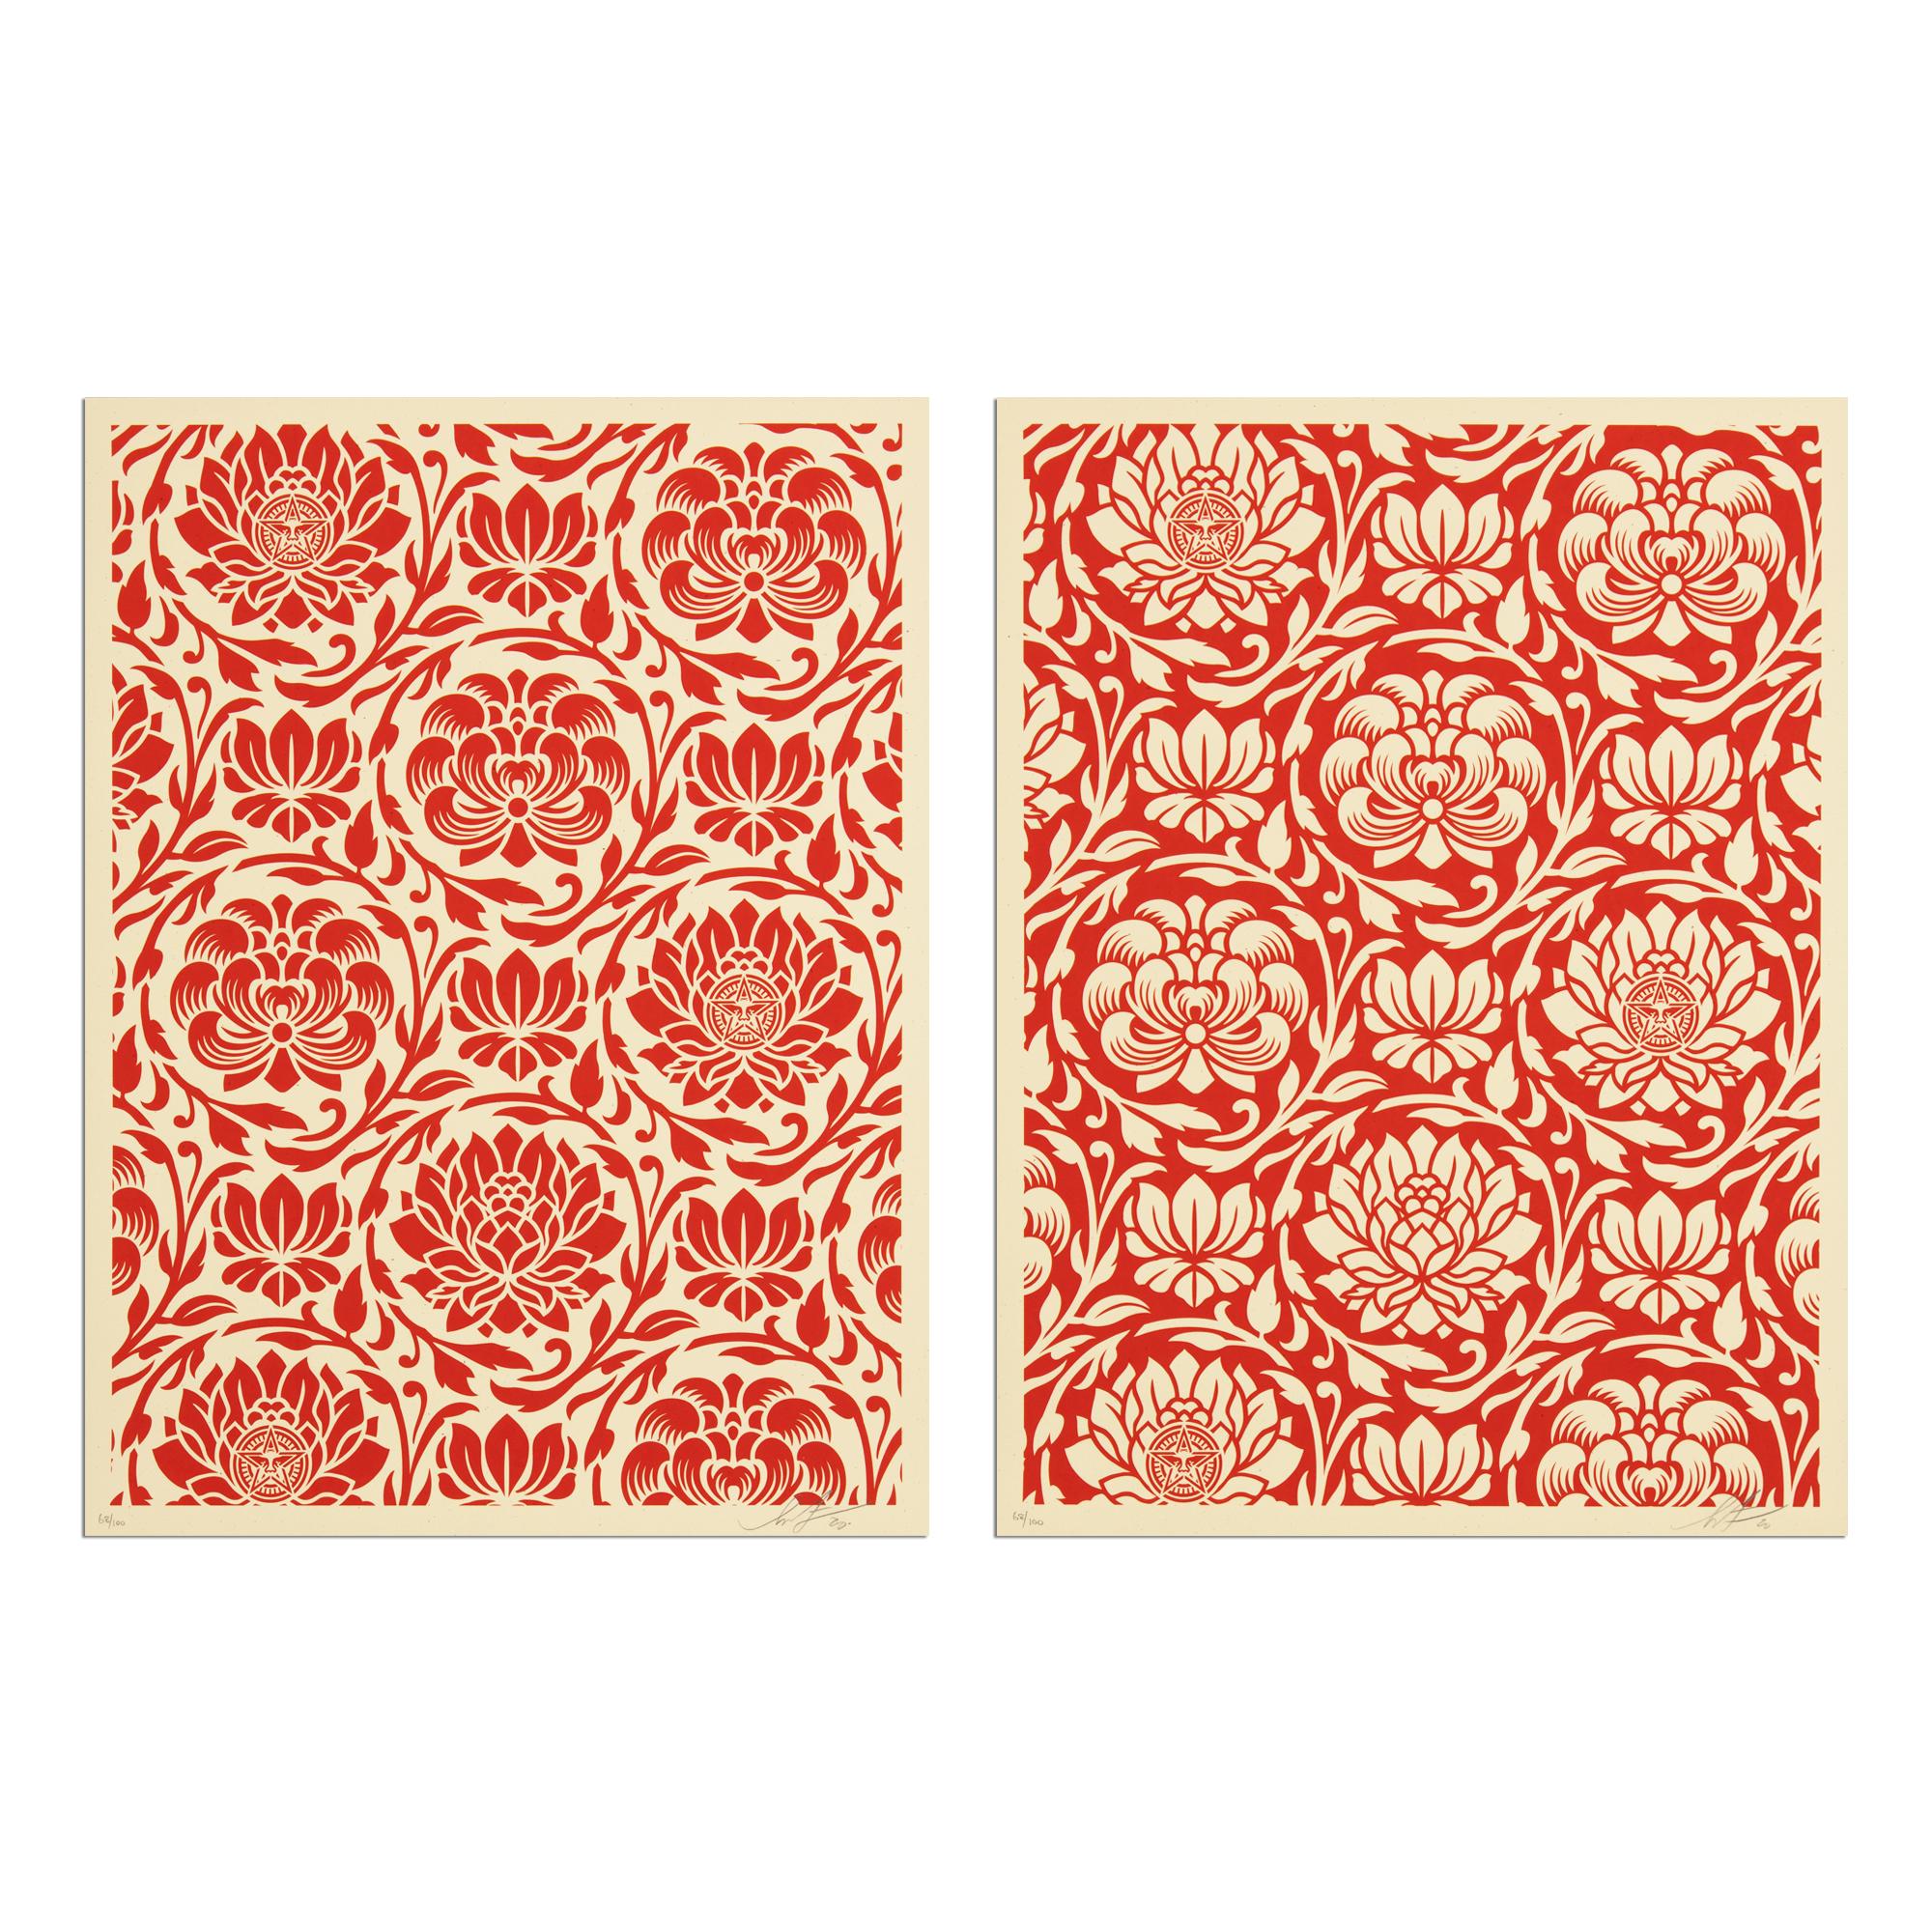 Shepard Fairey (American, b. 1970)
Floral Harmony (Red Yin/Yang), 2020
Medium: 2 screenprints on paper
Dimensions: each 24 x 18 in (61 x 46 cm)
Edition of 100: Each hand-signed and numbered in pencil
Condition: Mint